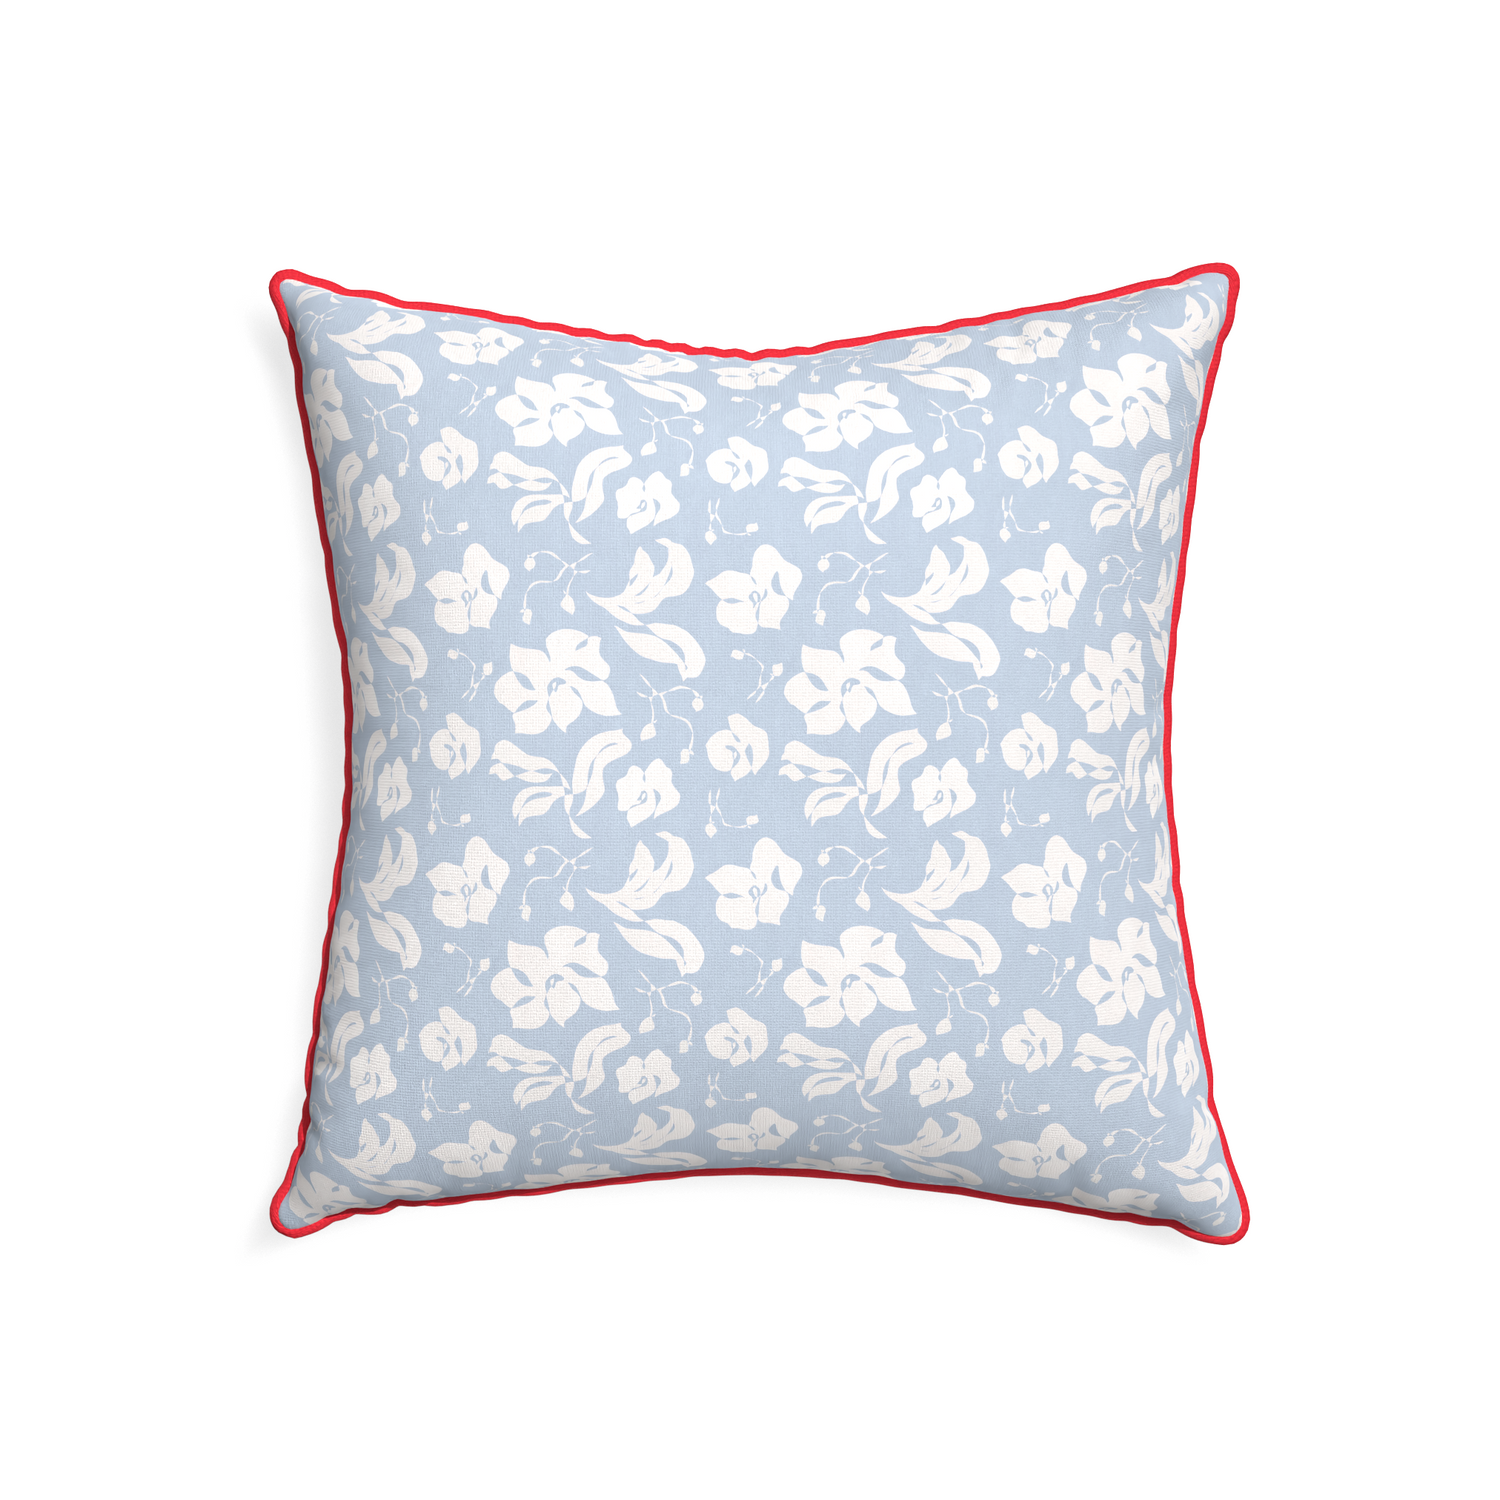 22-square georgia custom pillow with cherry piping on white background